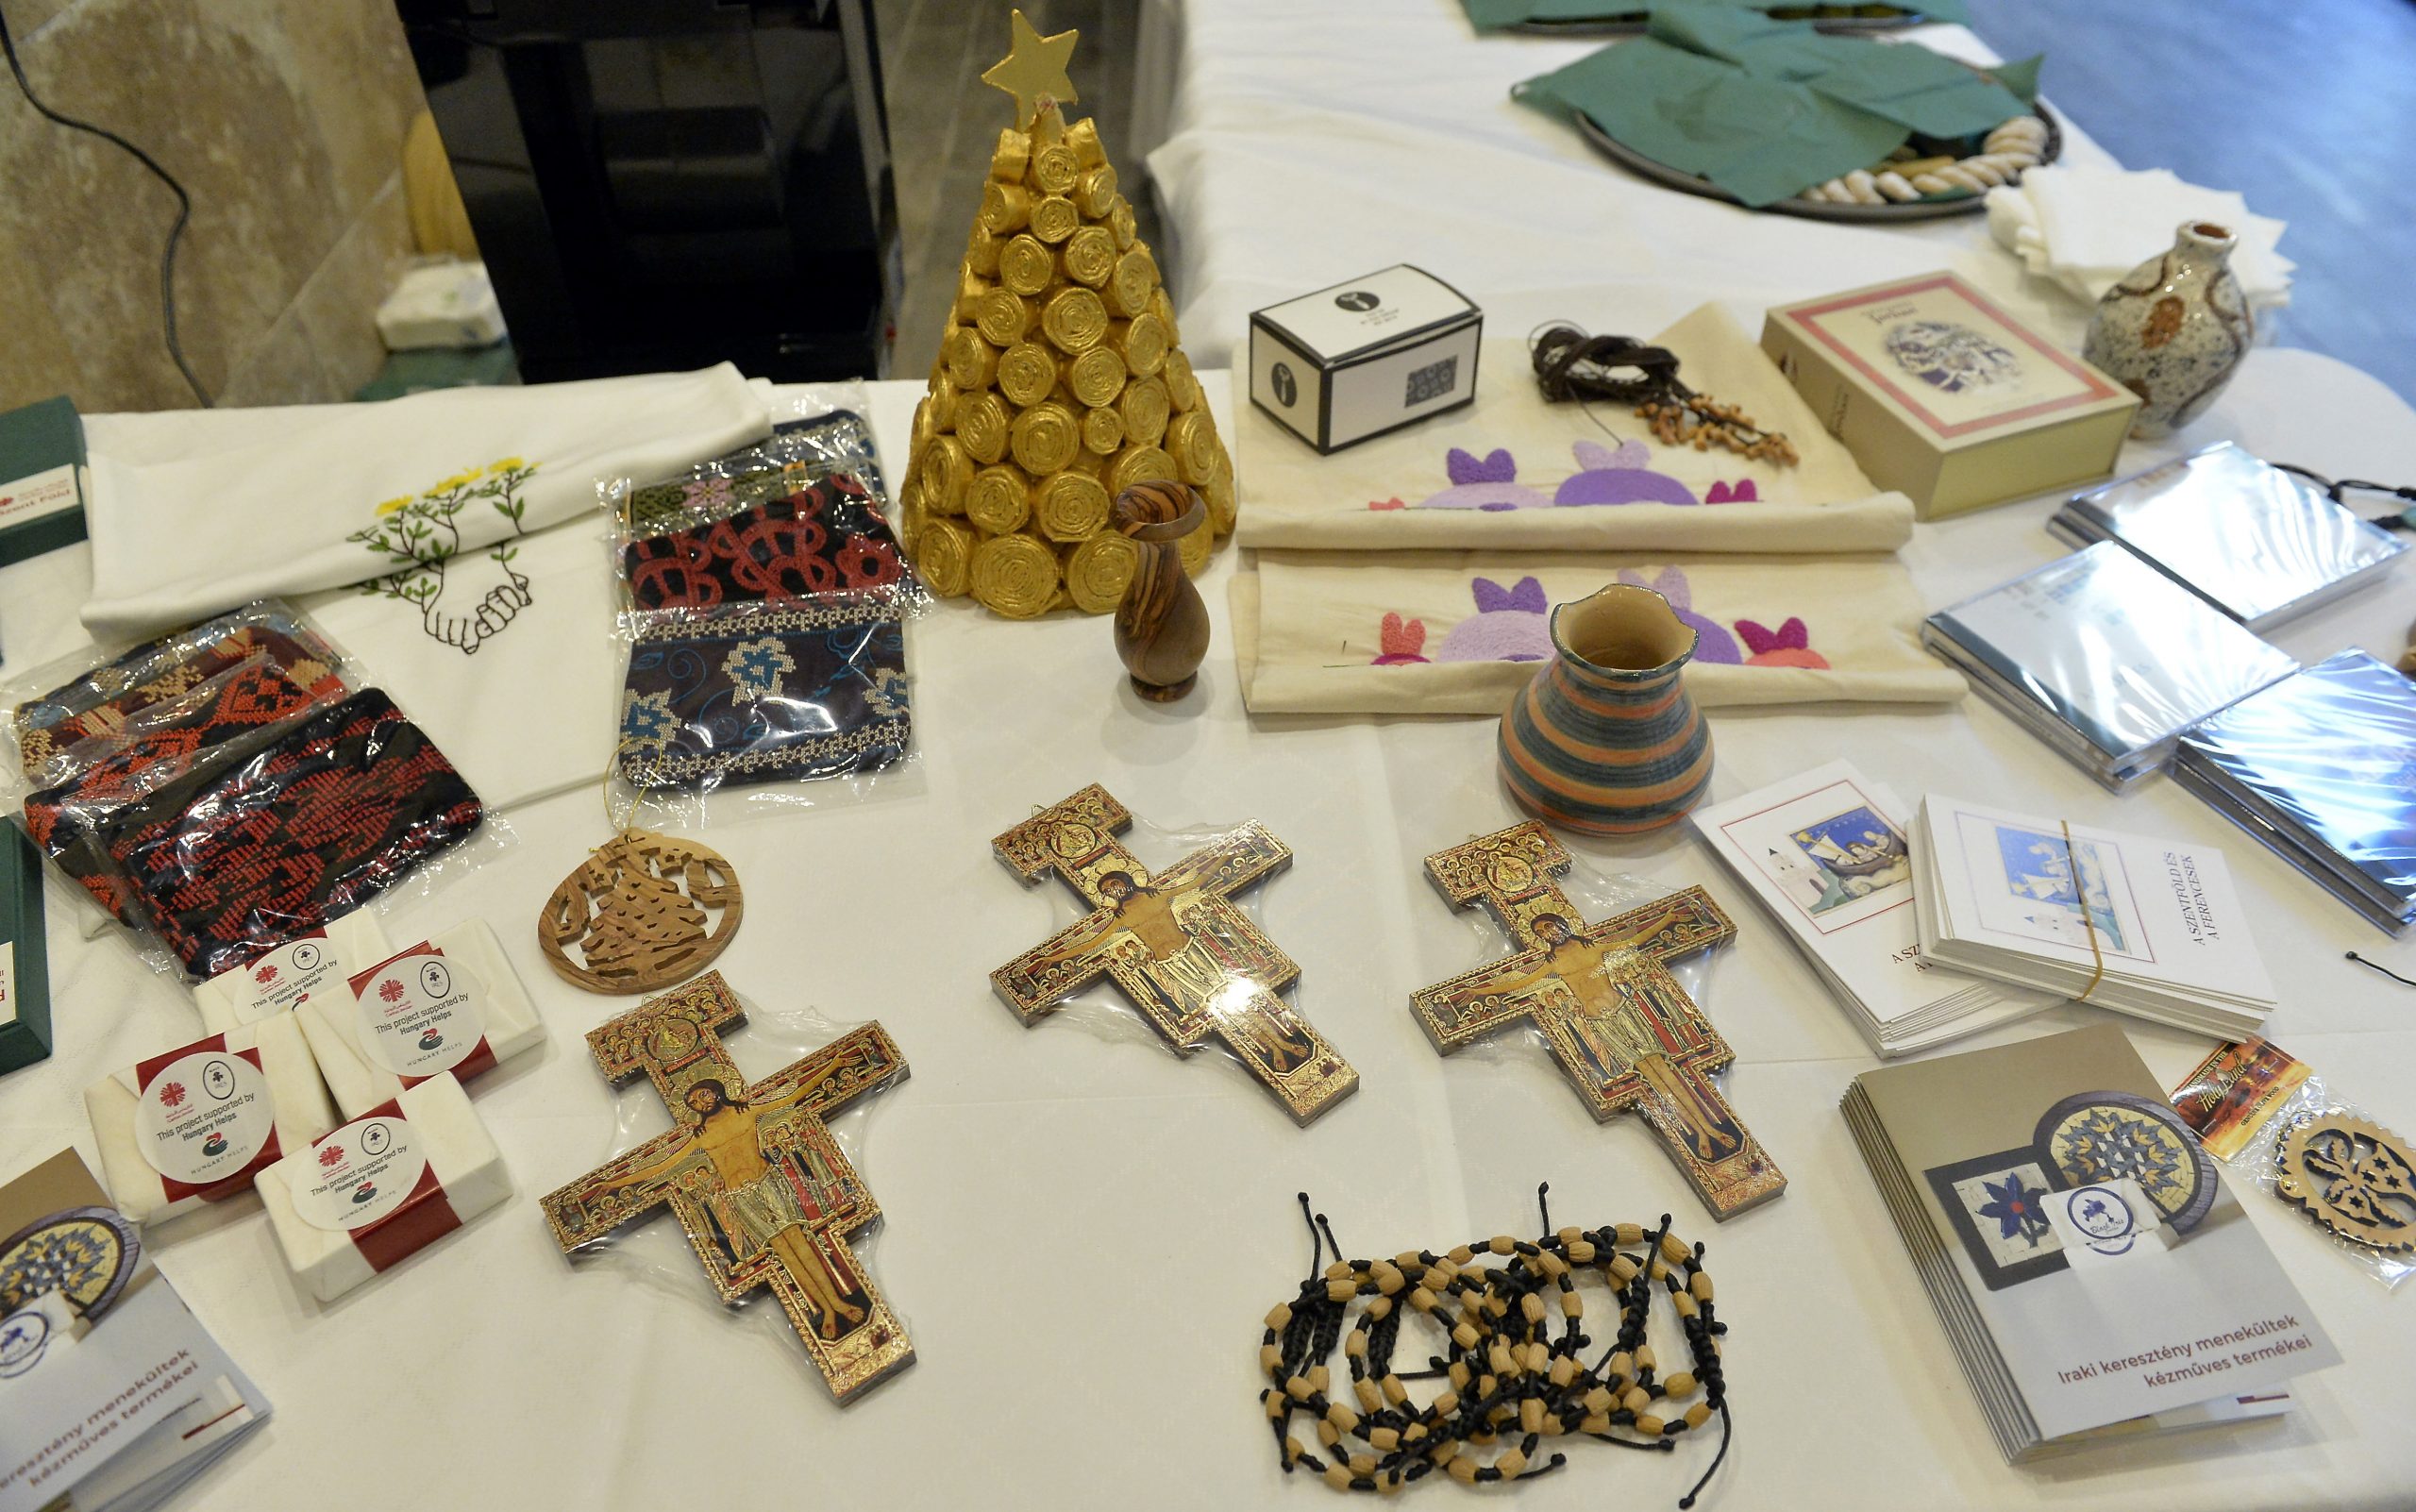 A charity shop opens to help persecuted Christians